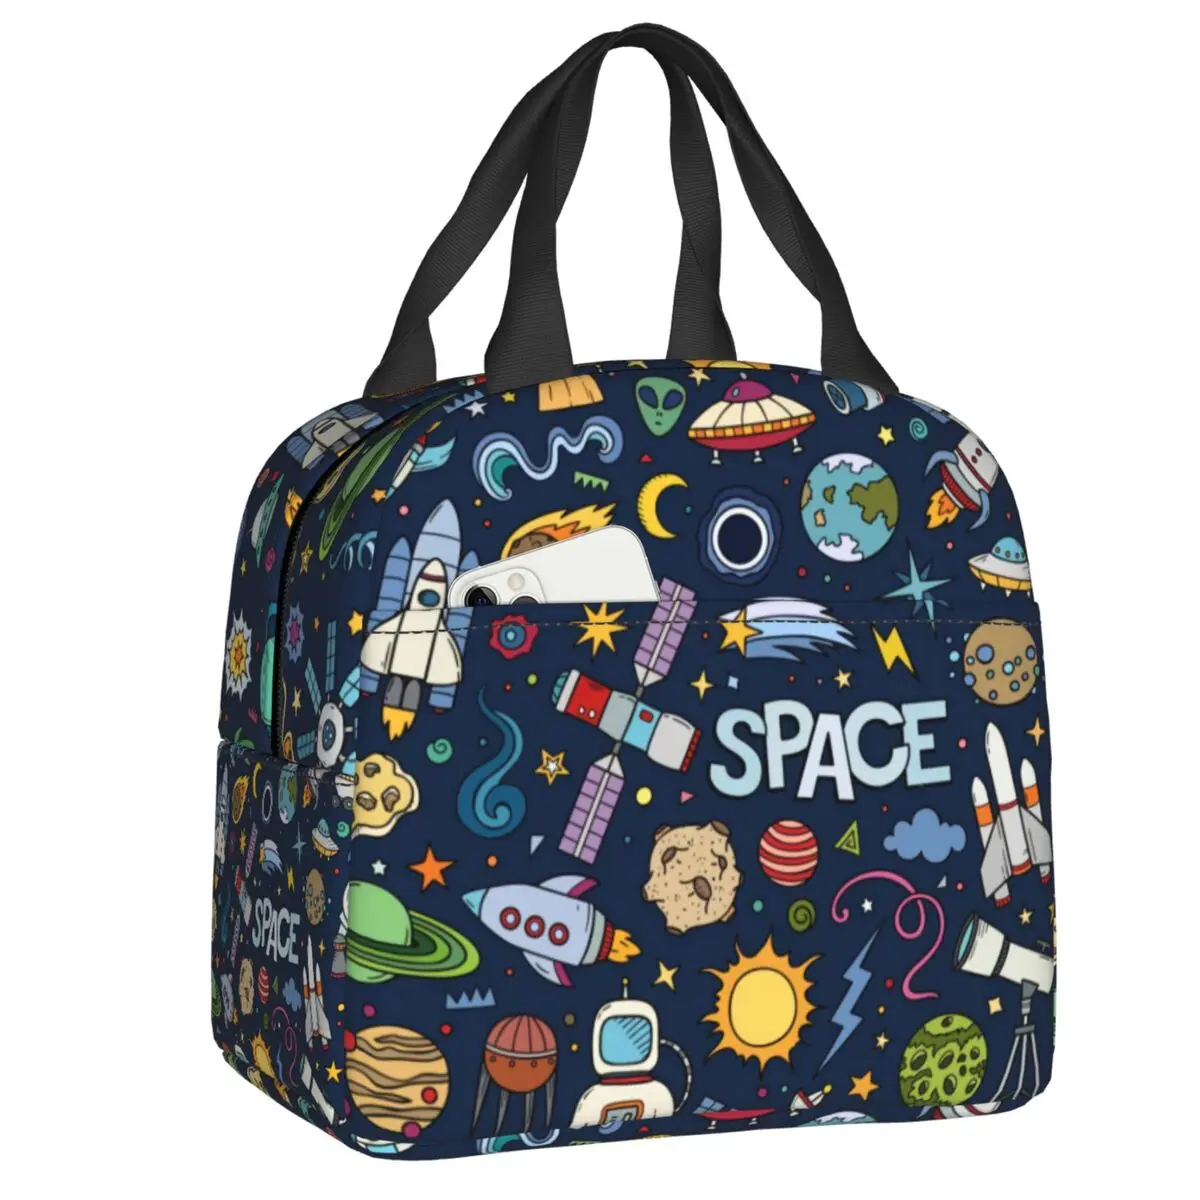 

Space Universe Sun Planet Lunch Bag Cooler Warm Insulated Astronaut Spaceman Lunch Box for Women Kids School Picnic Food Bags